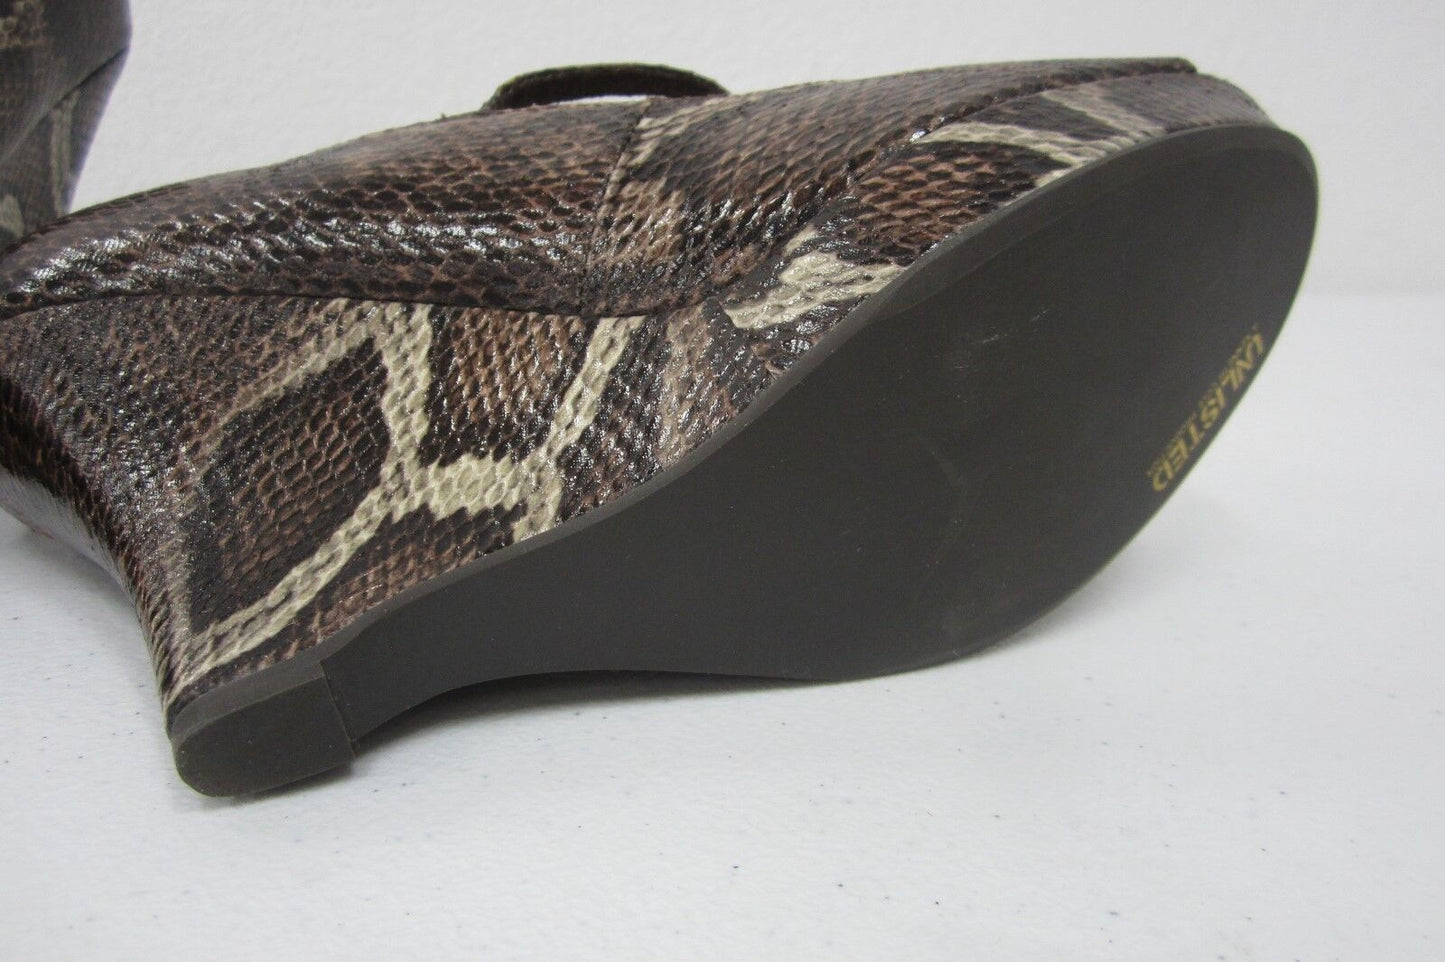 *NIB* UNLISTED A KENNETH COLE PRODUCTION BUZZY BROWN SNAKE  HEEL WEDGE Sz  8.5 M